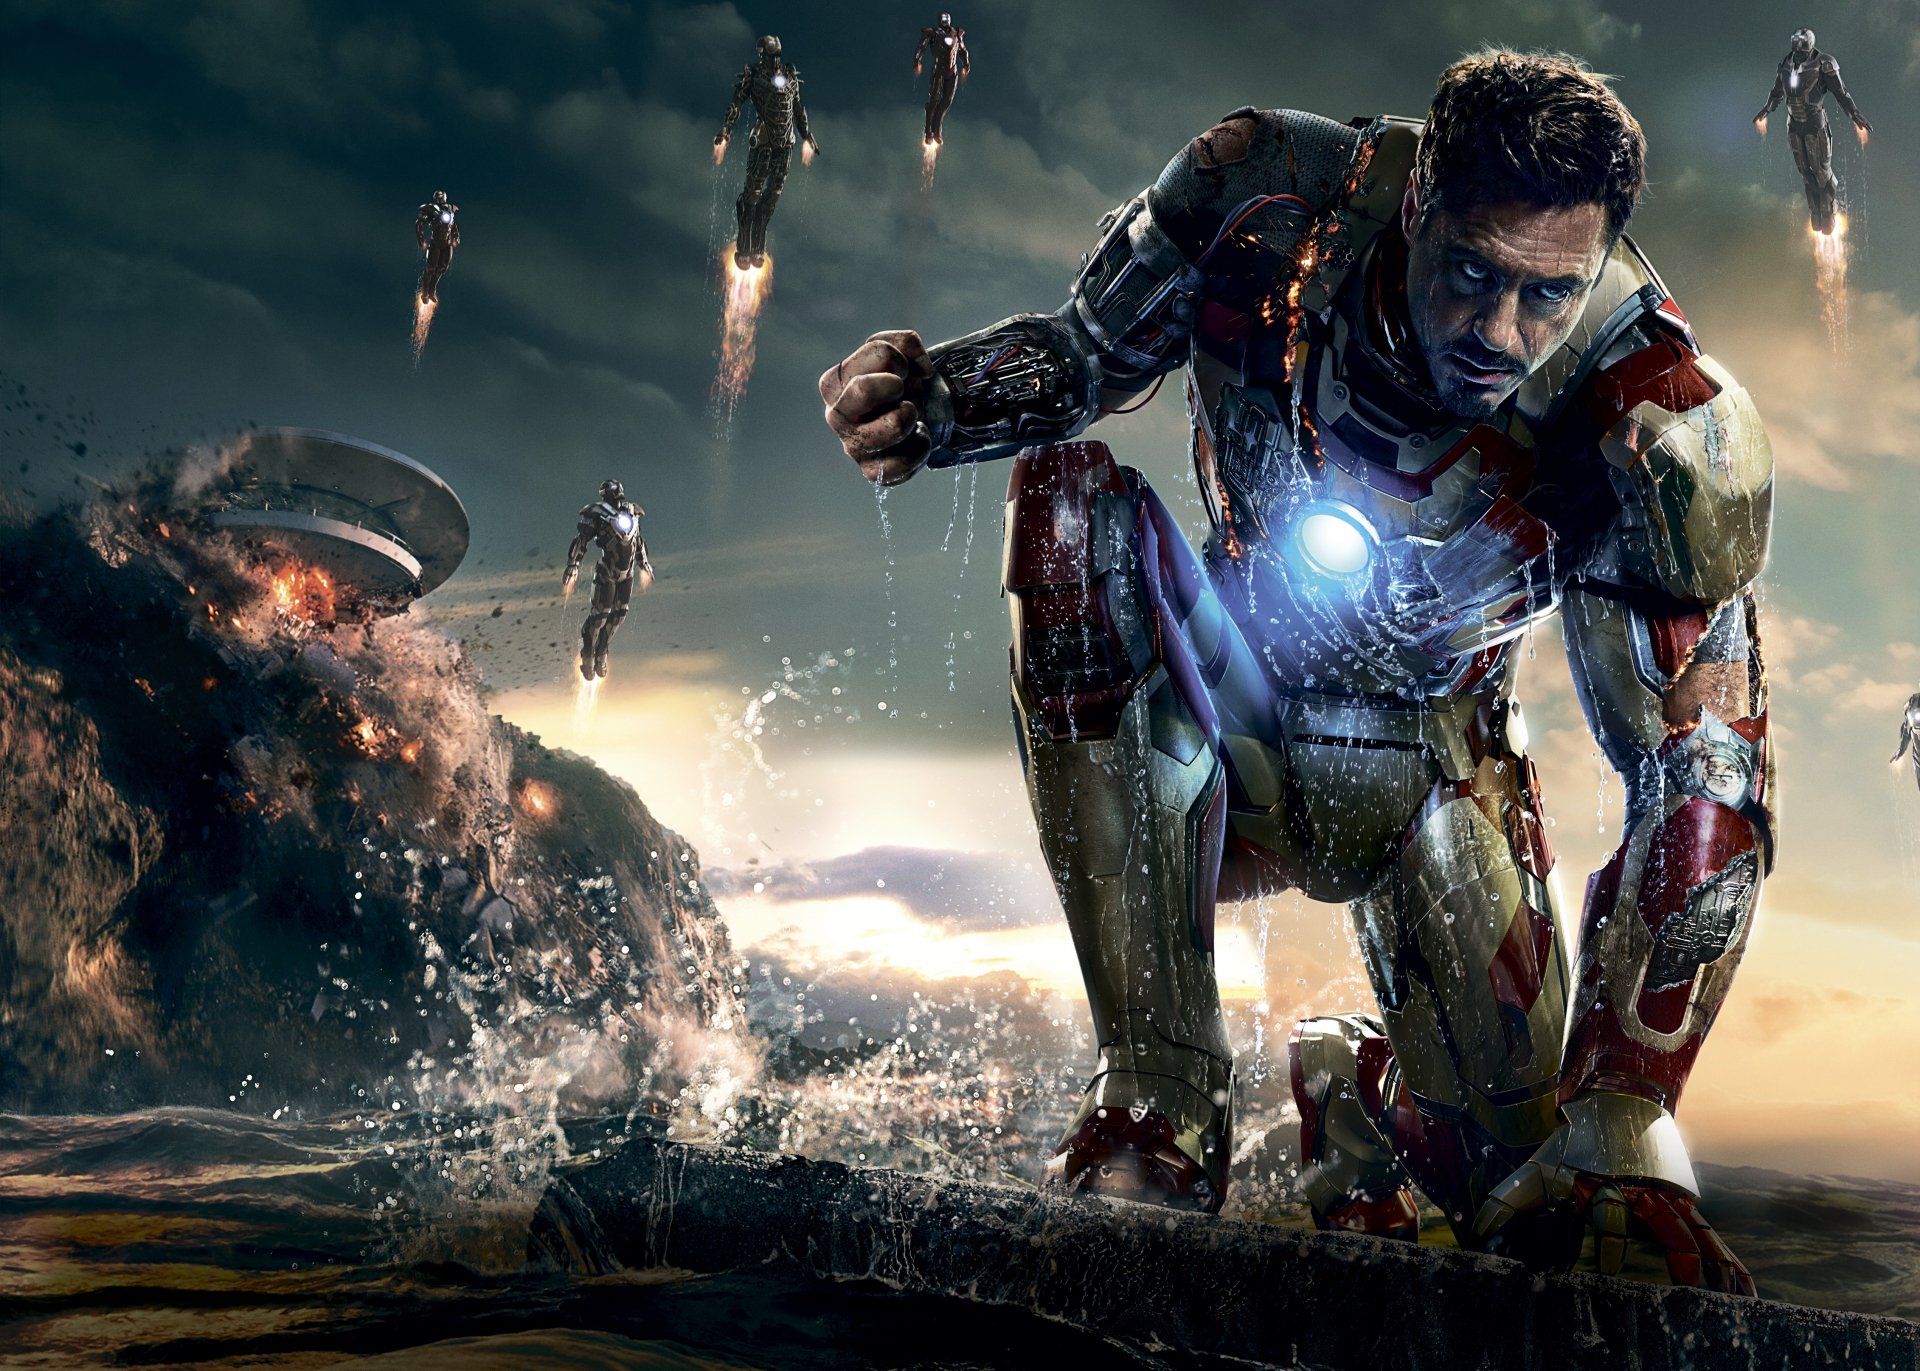 121 Iron Man 3 Hd Wallpapers Background Images Wallpaper Abyss Images, Photos, Reviews